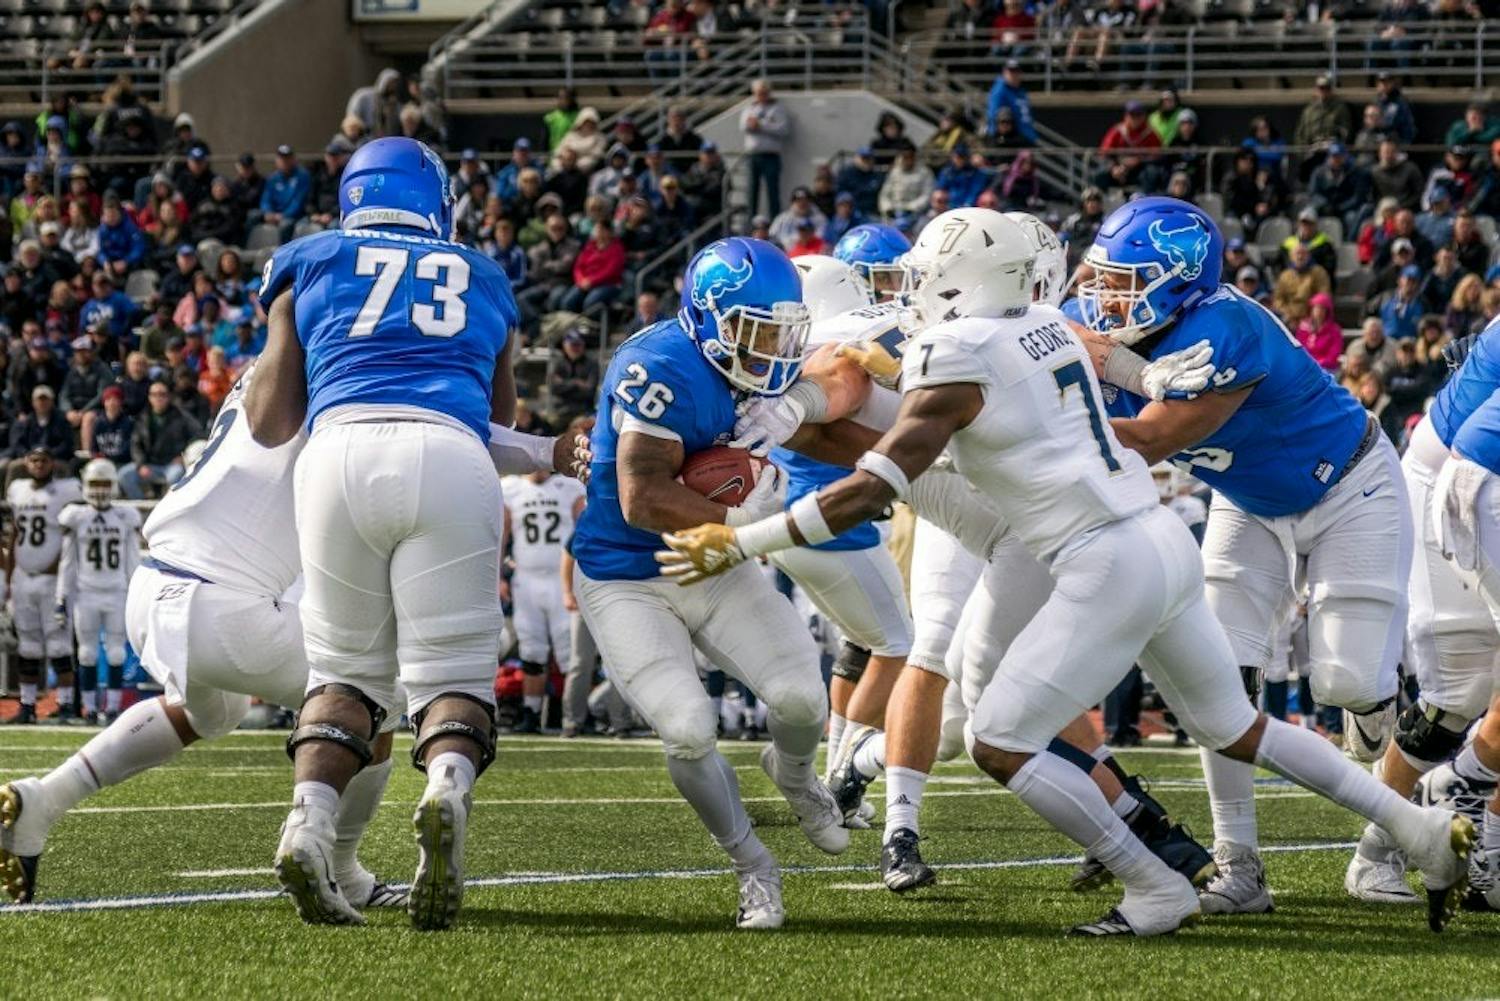 Jaret Paterson of UB Football in action during a game last fall.&nbsp;